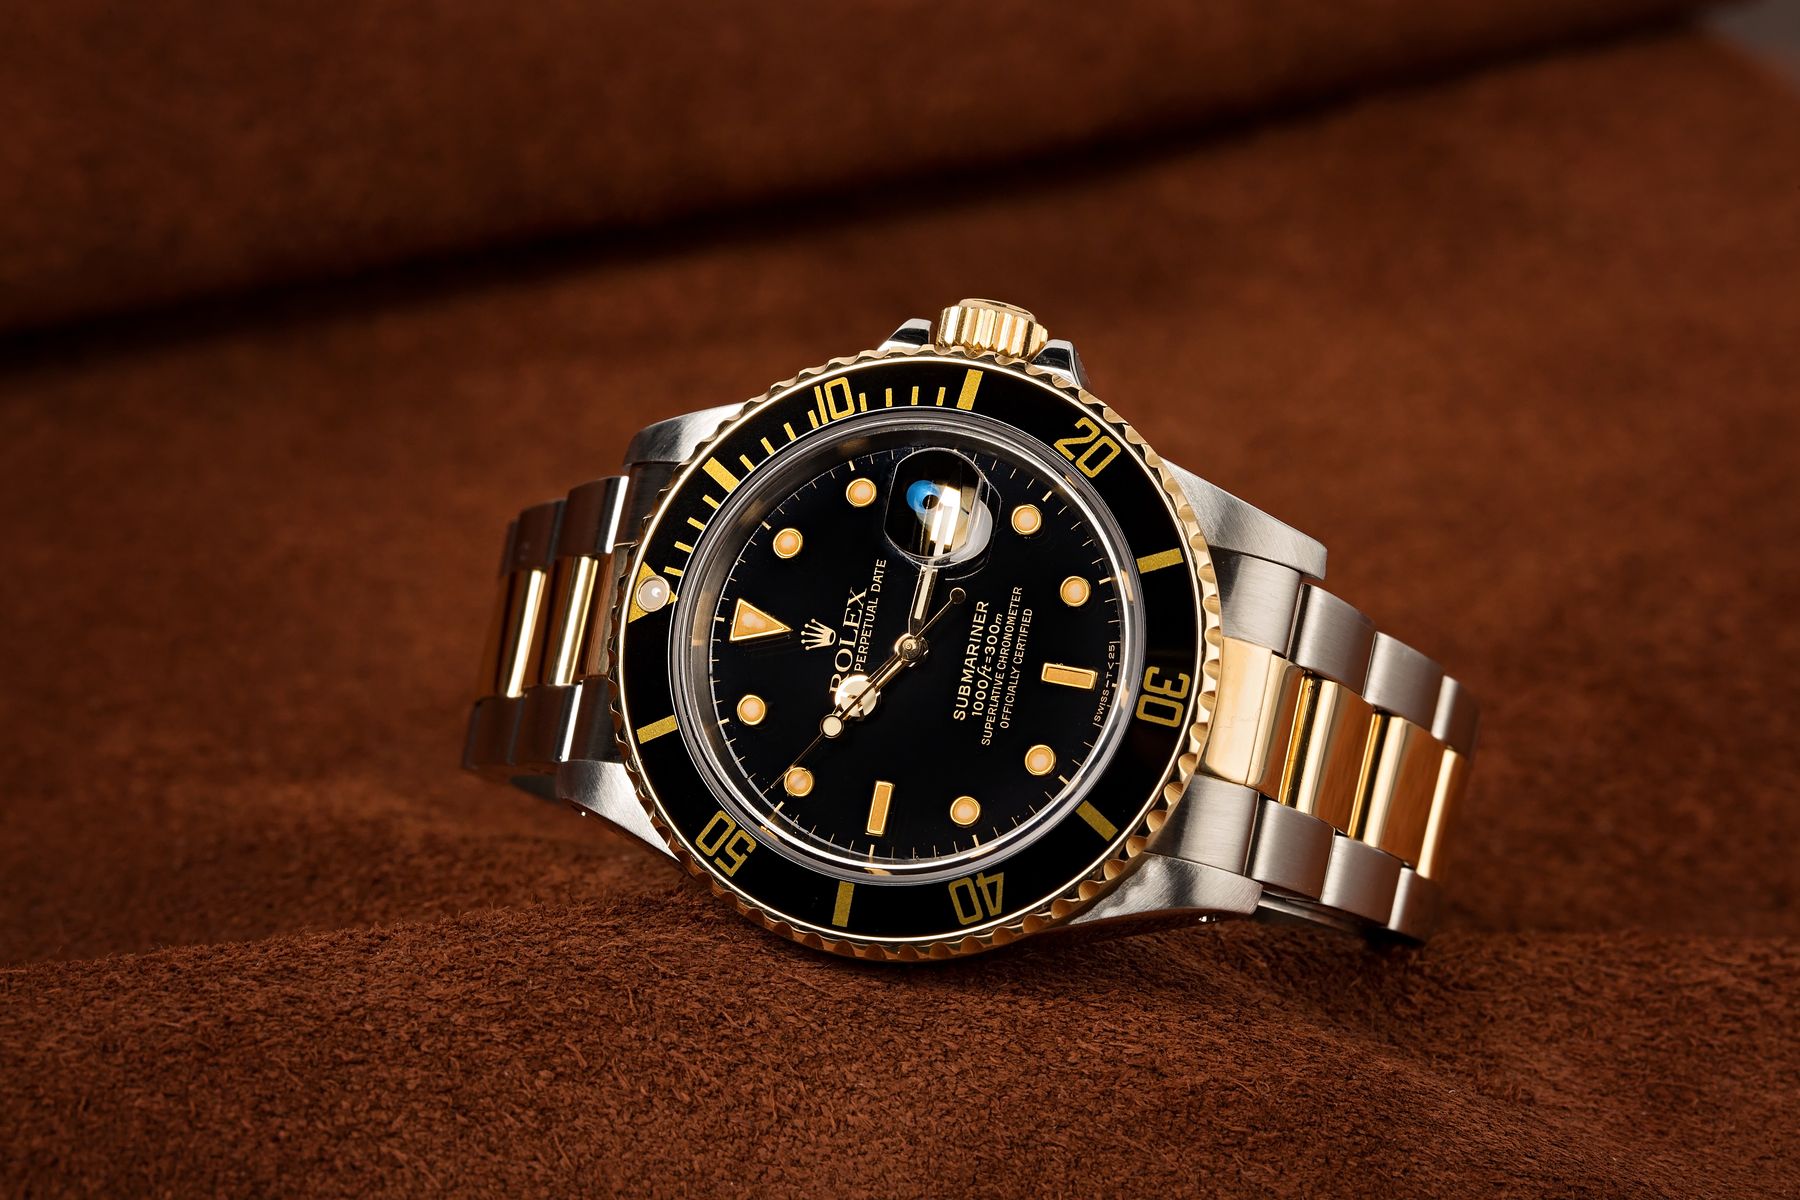 Rolex Submariner Two Tone History and Evolution - Bob's Watches